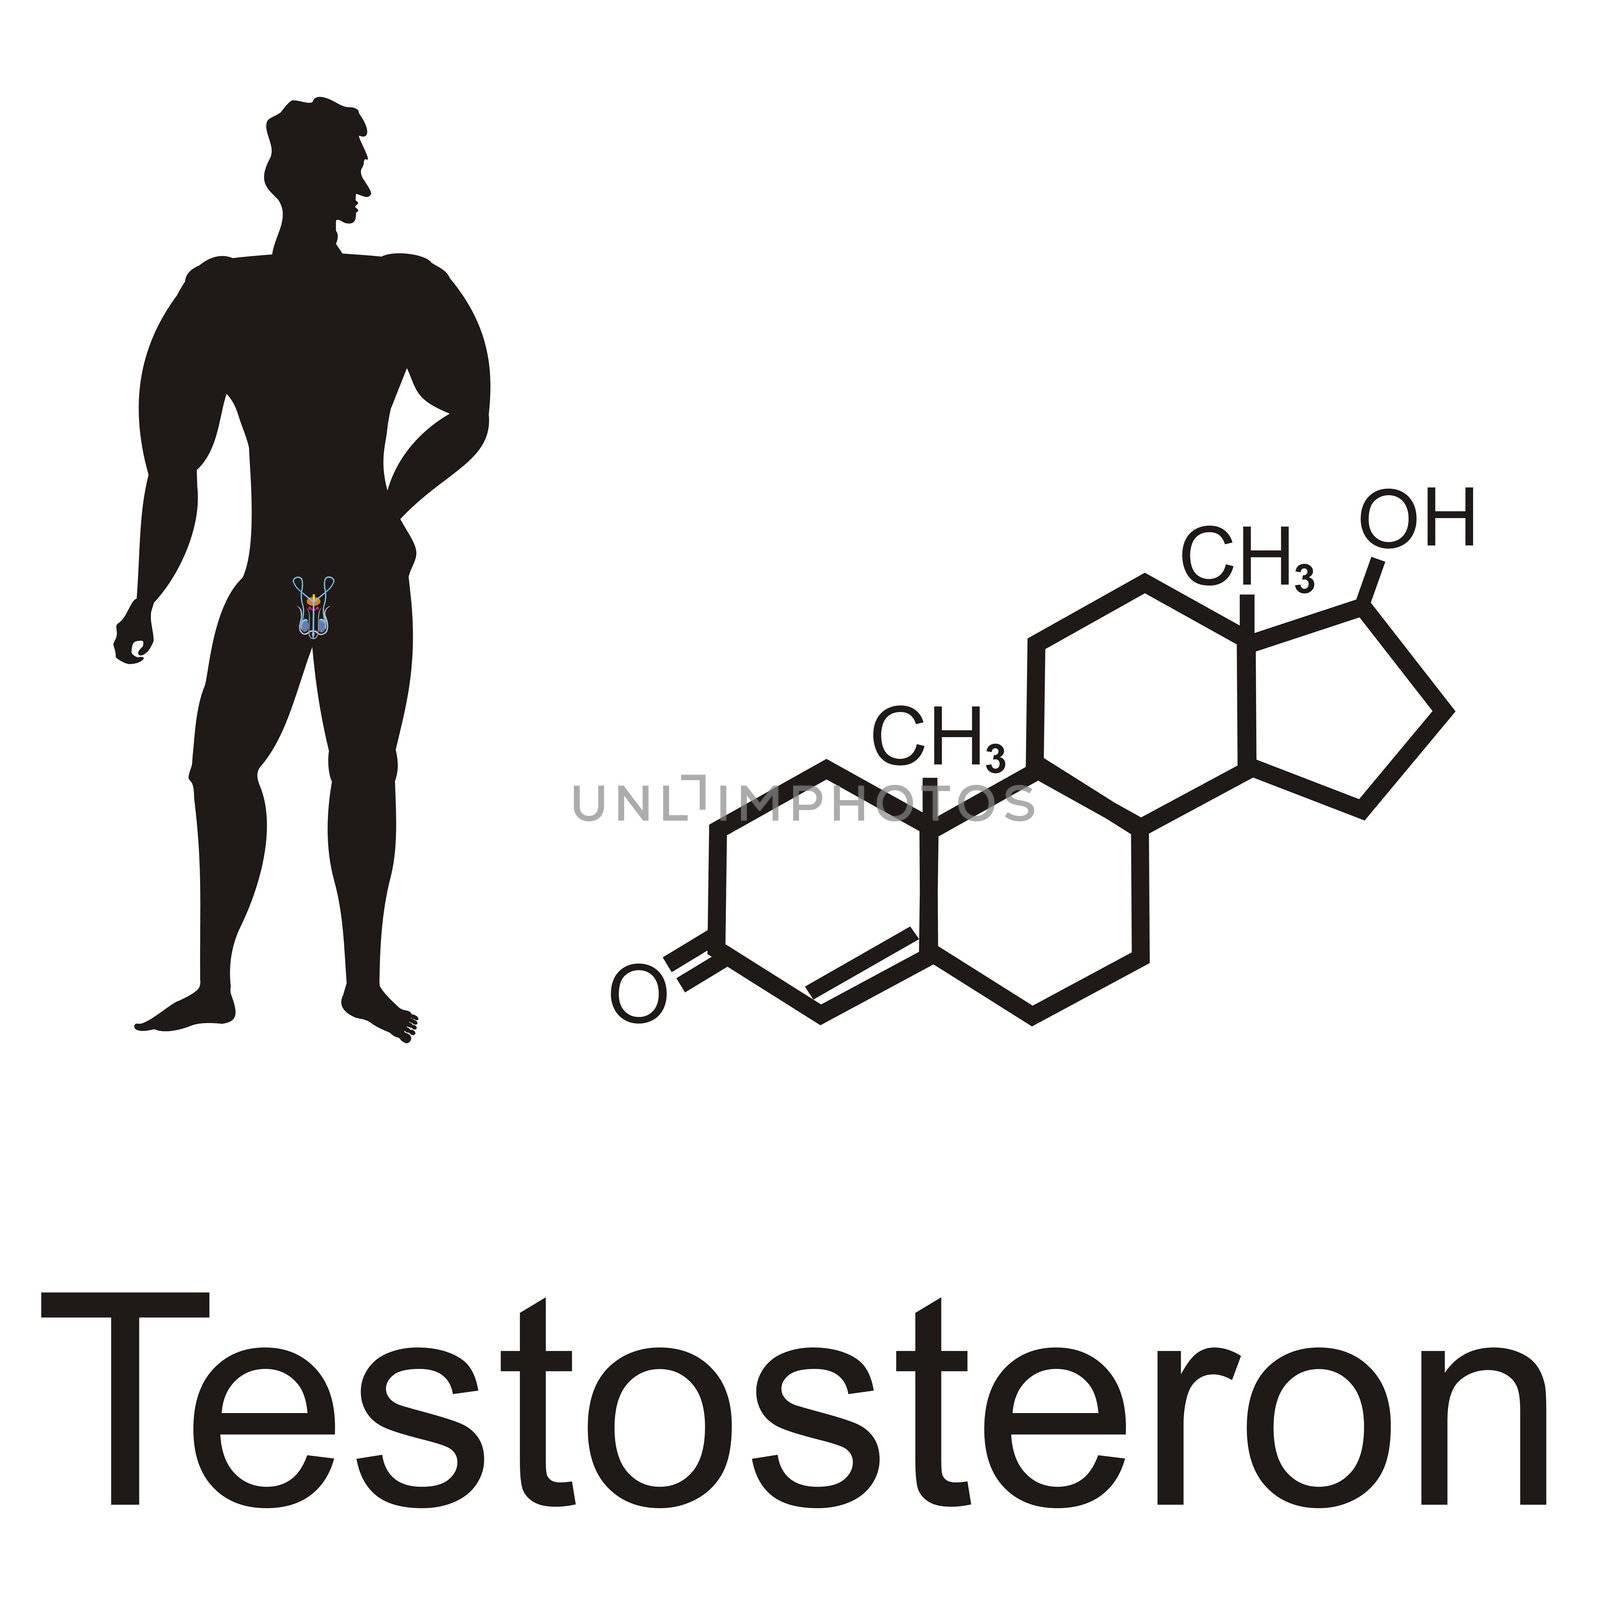 male silhouette with reproductive organs and testosteron formula